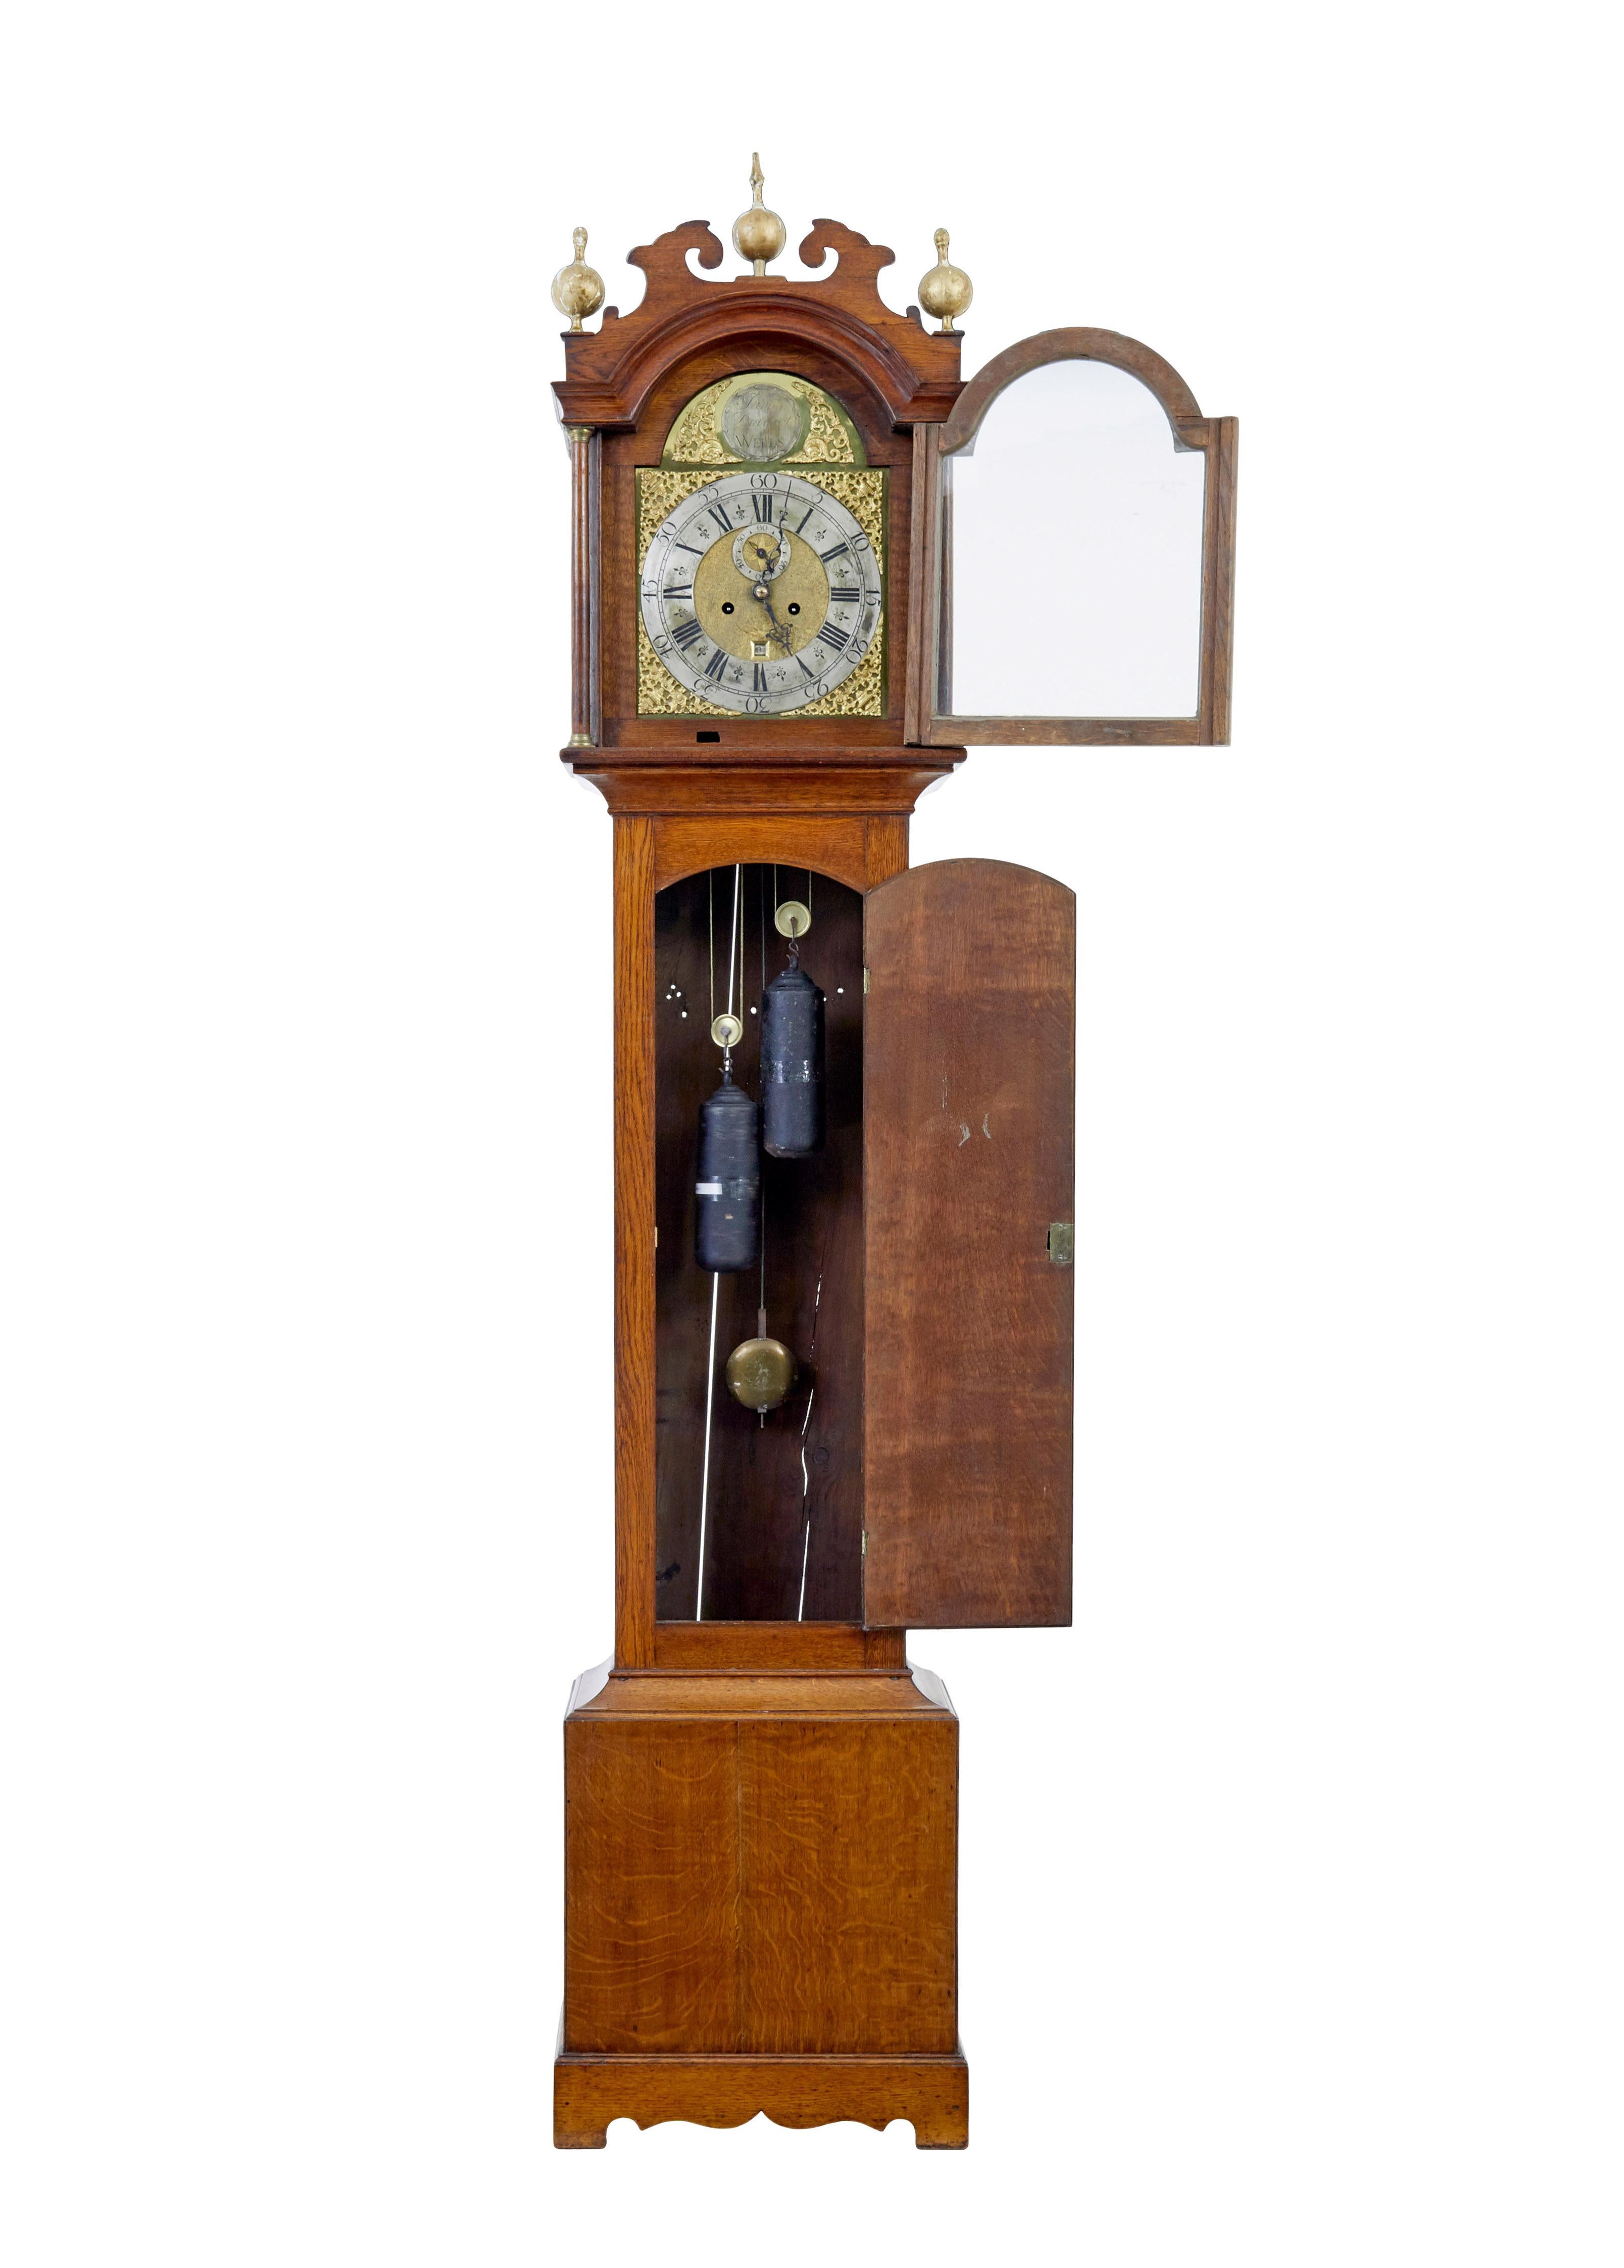 18th century oak longcase clock by james draycot wells, circa 1790.

Excellent quality golden oak longcase clock. Second hand dial, date and baring the makers disc at the top.

Hood with decorative cornice and 3 gilt finials complete with glazed